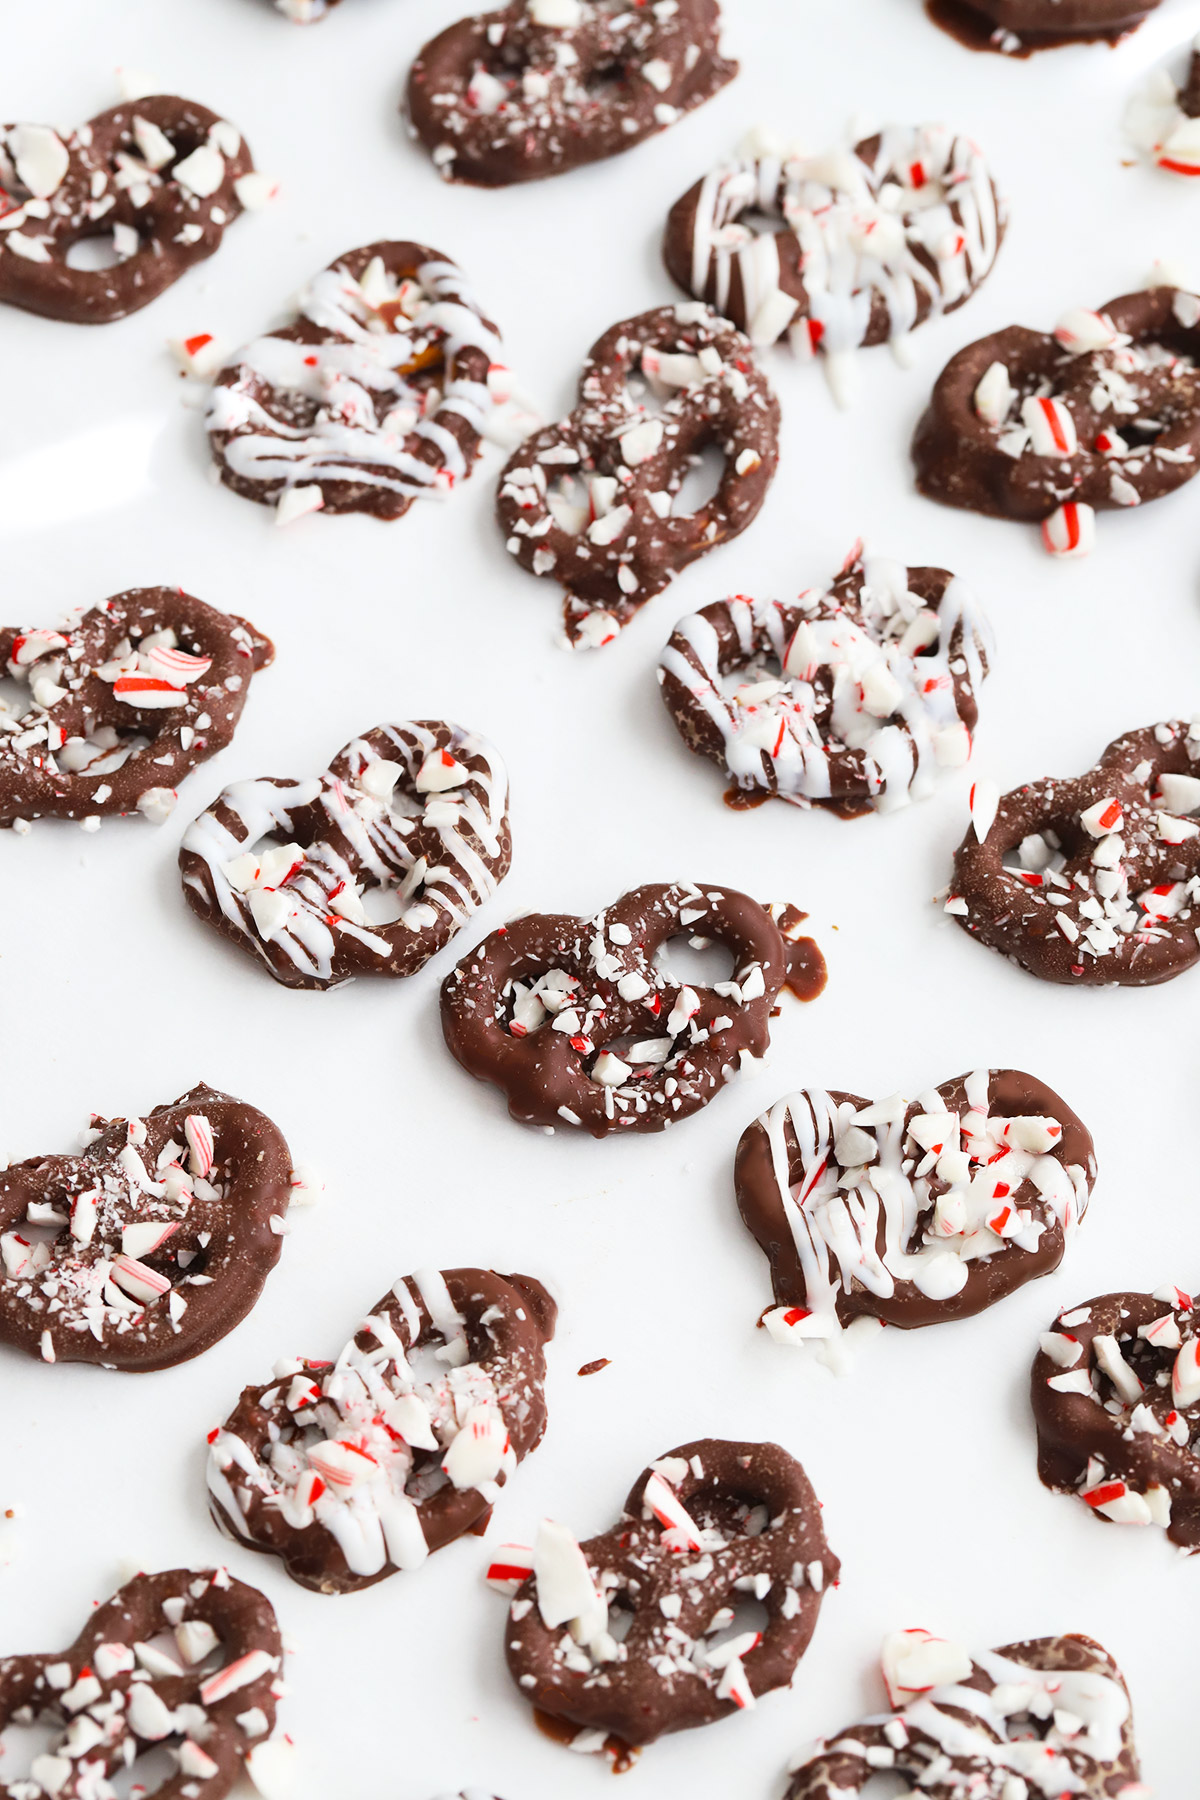 Overhead view of gluten free chocolate peppermint pretzels sprinkled with crushed candy canes on a white background.